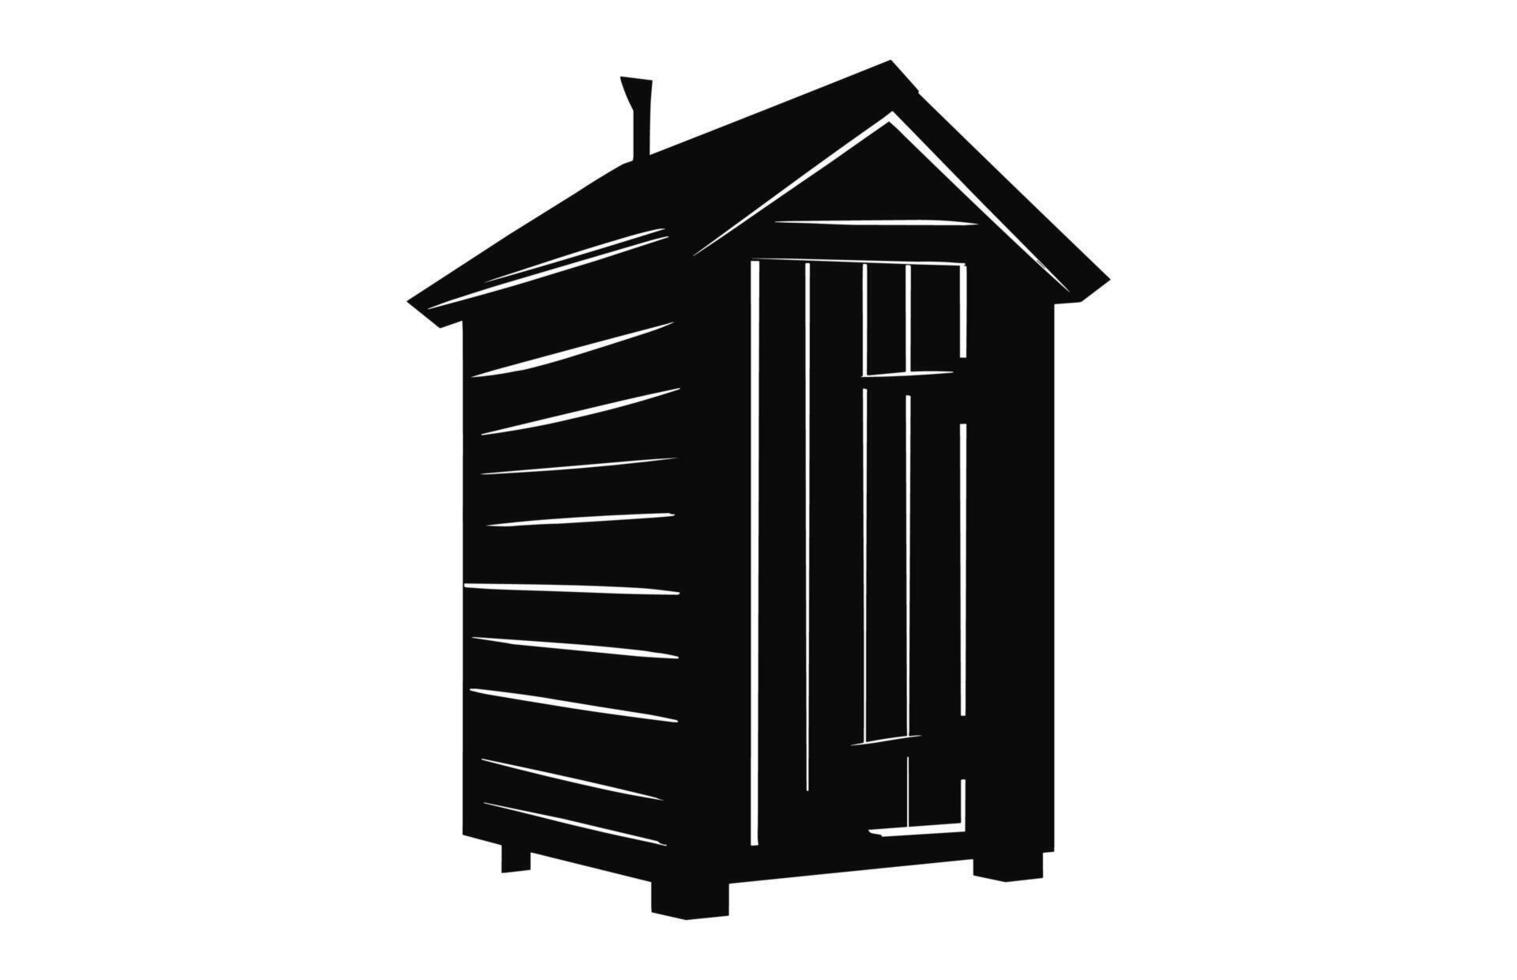 Wooden old outhouse silhouette vector, Old wooden toilet black Clipart, Village restroom silhouette vector